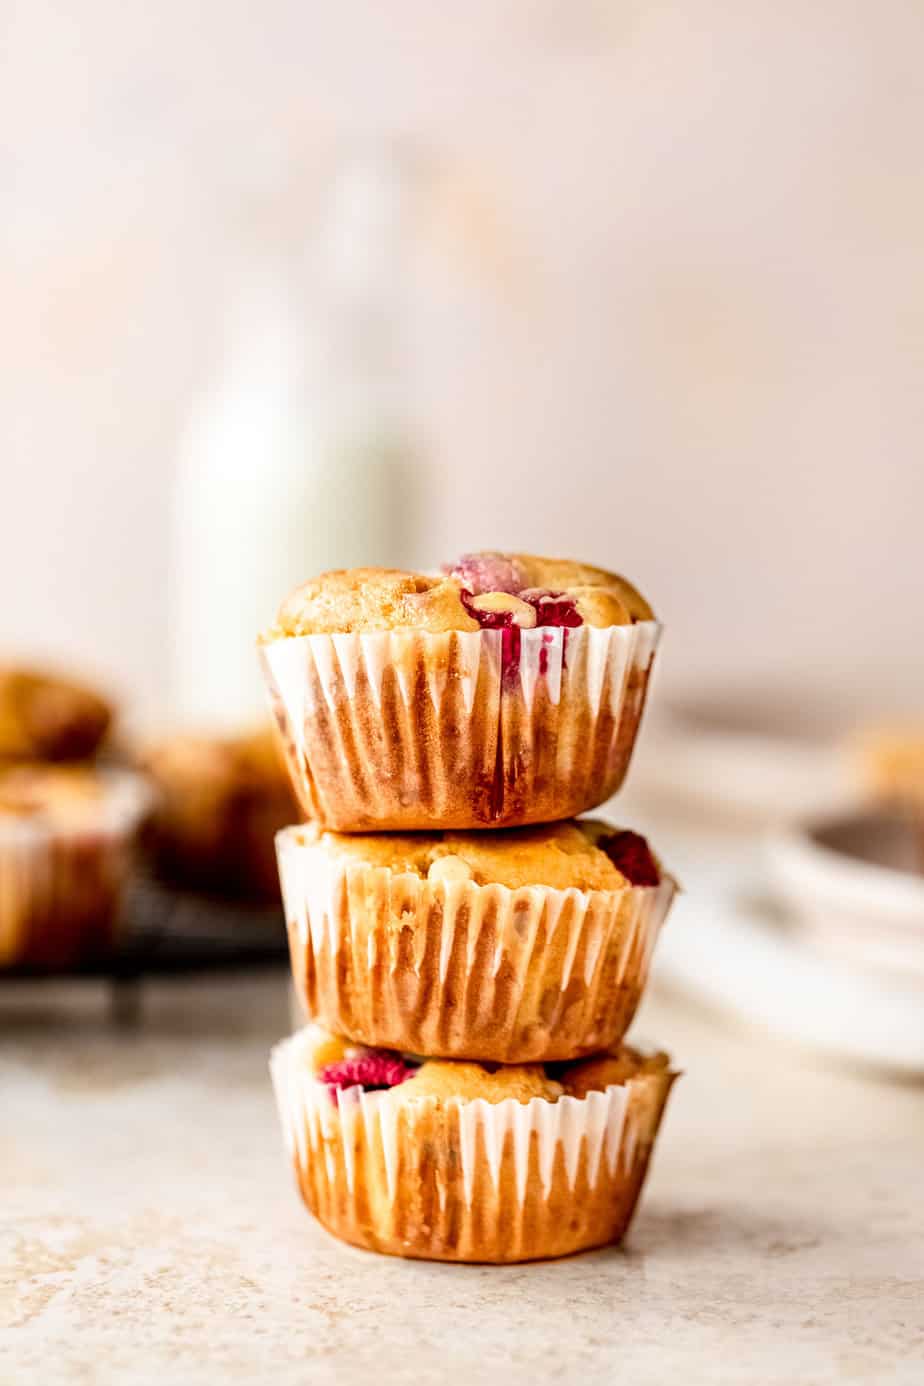 Three raspberry muffins stacked on top of each other.